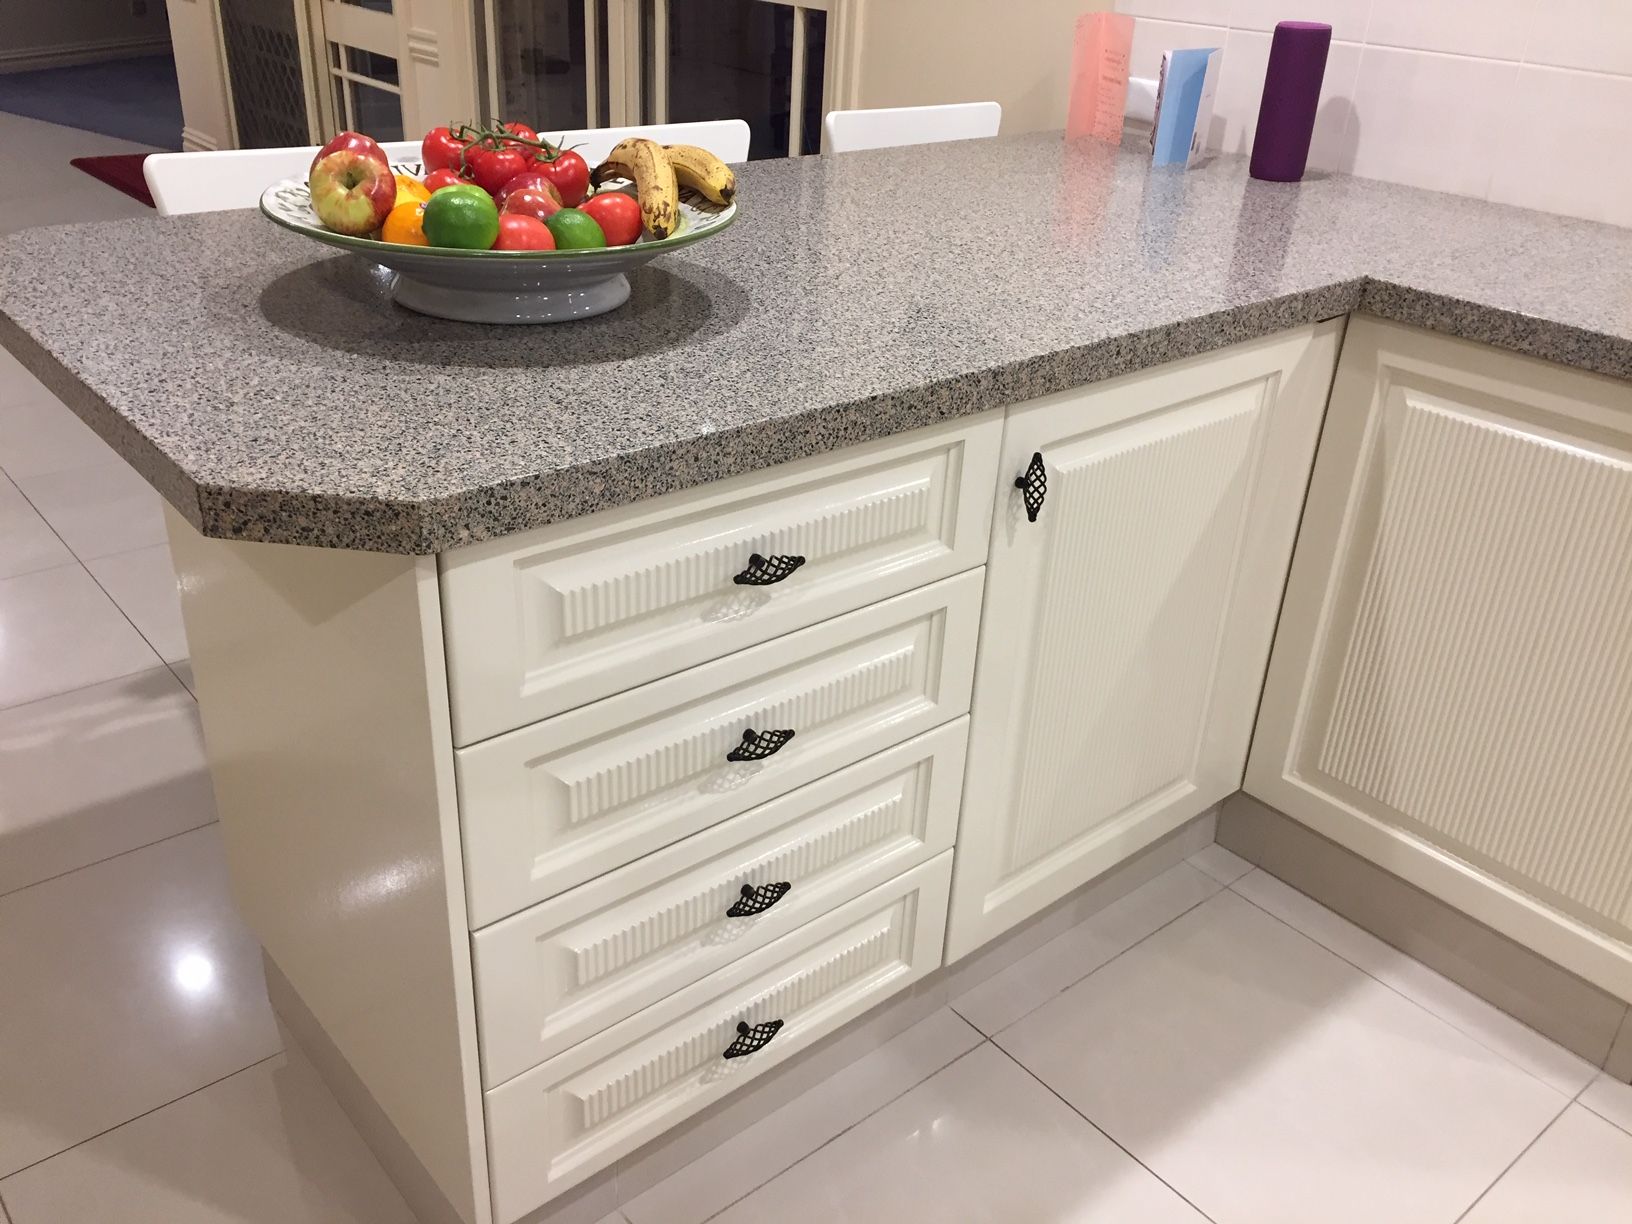 Solved: Painting kitchen cabinet doors - Dulux R ...